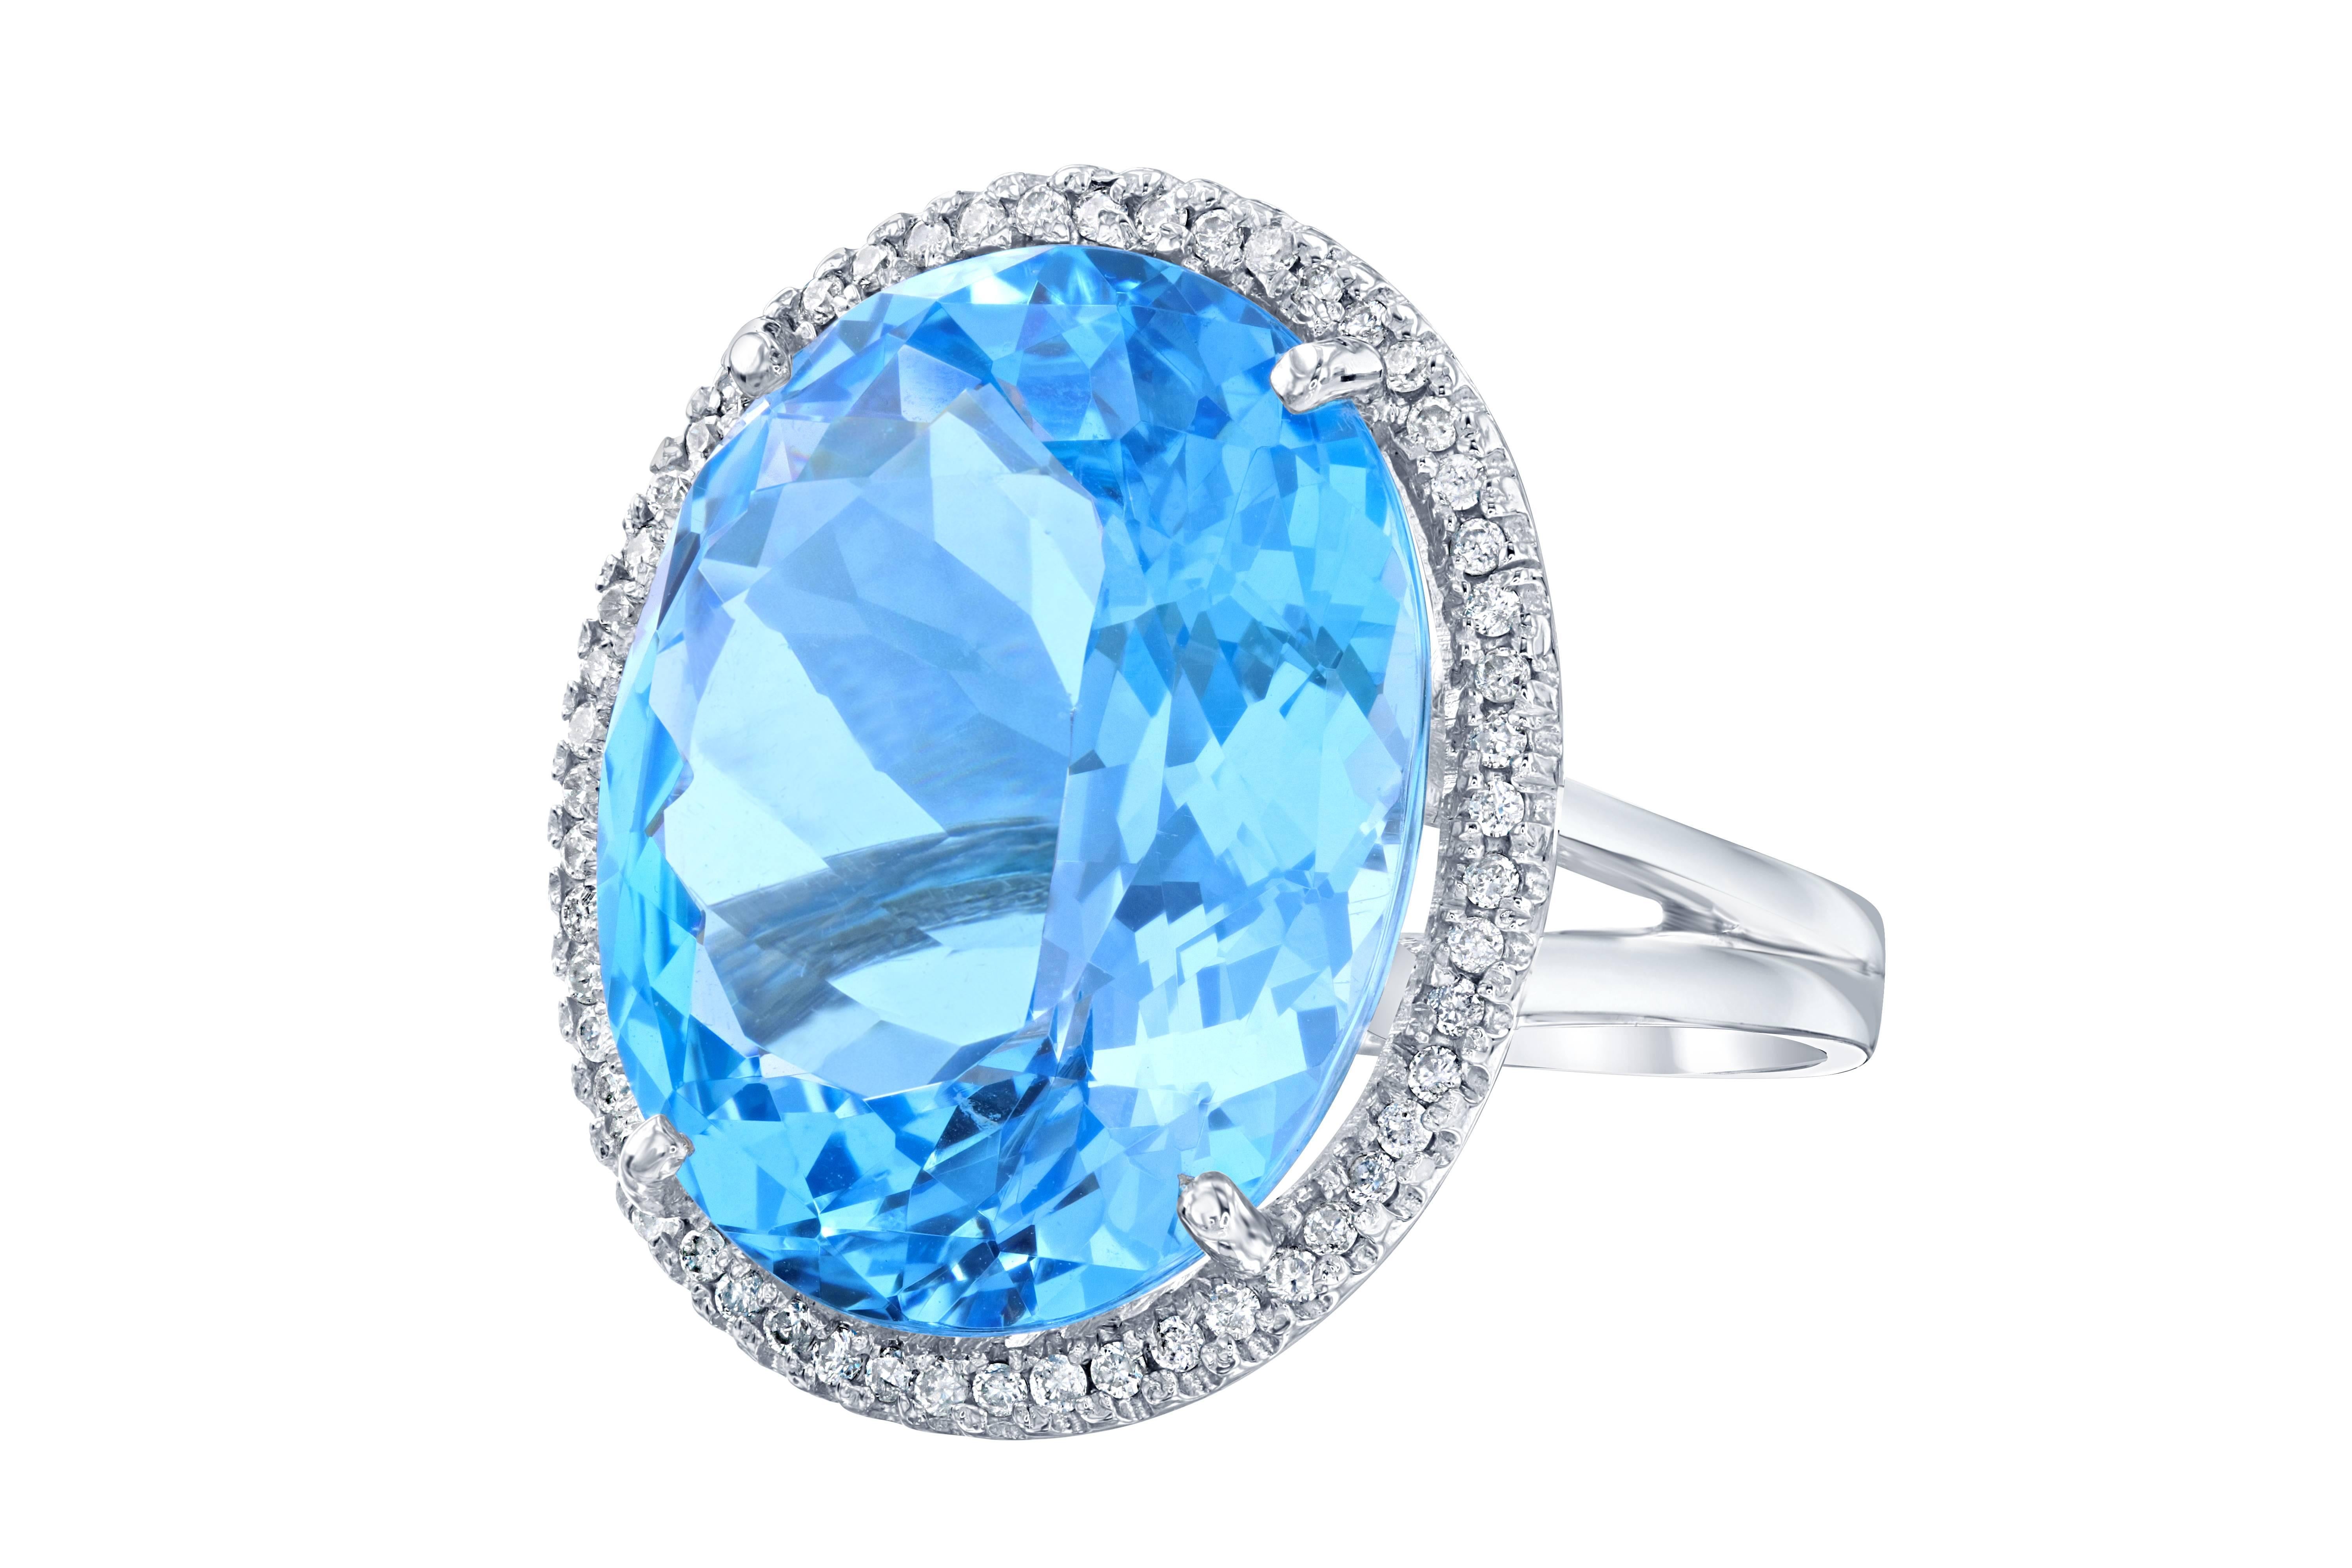 A true statement piece! This stunning ring has a huge Oval cut Blue Topaz that weighs 33.42 carats and is surrounded by a halo of 54 Round Cut Diamonds that weigh 0.43 carat (Clarity: SI2, Color: F). The ring is made in 14K White Gold and weighs